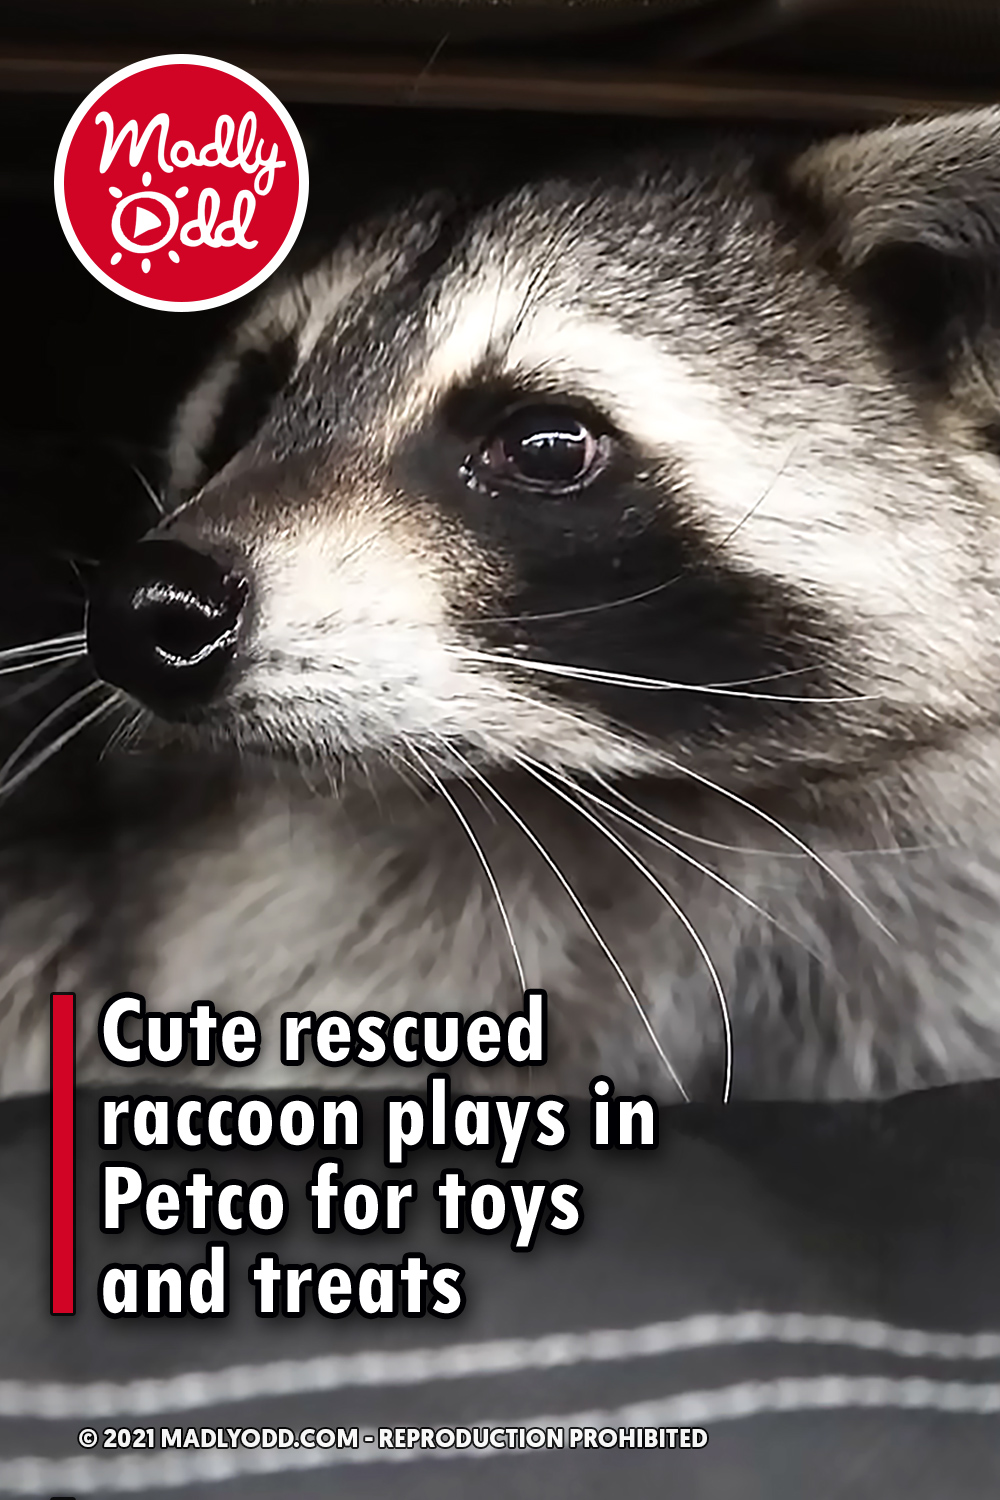 Cute rescued raccoon plays in Petco for toys and treats